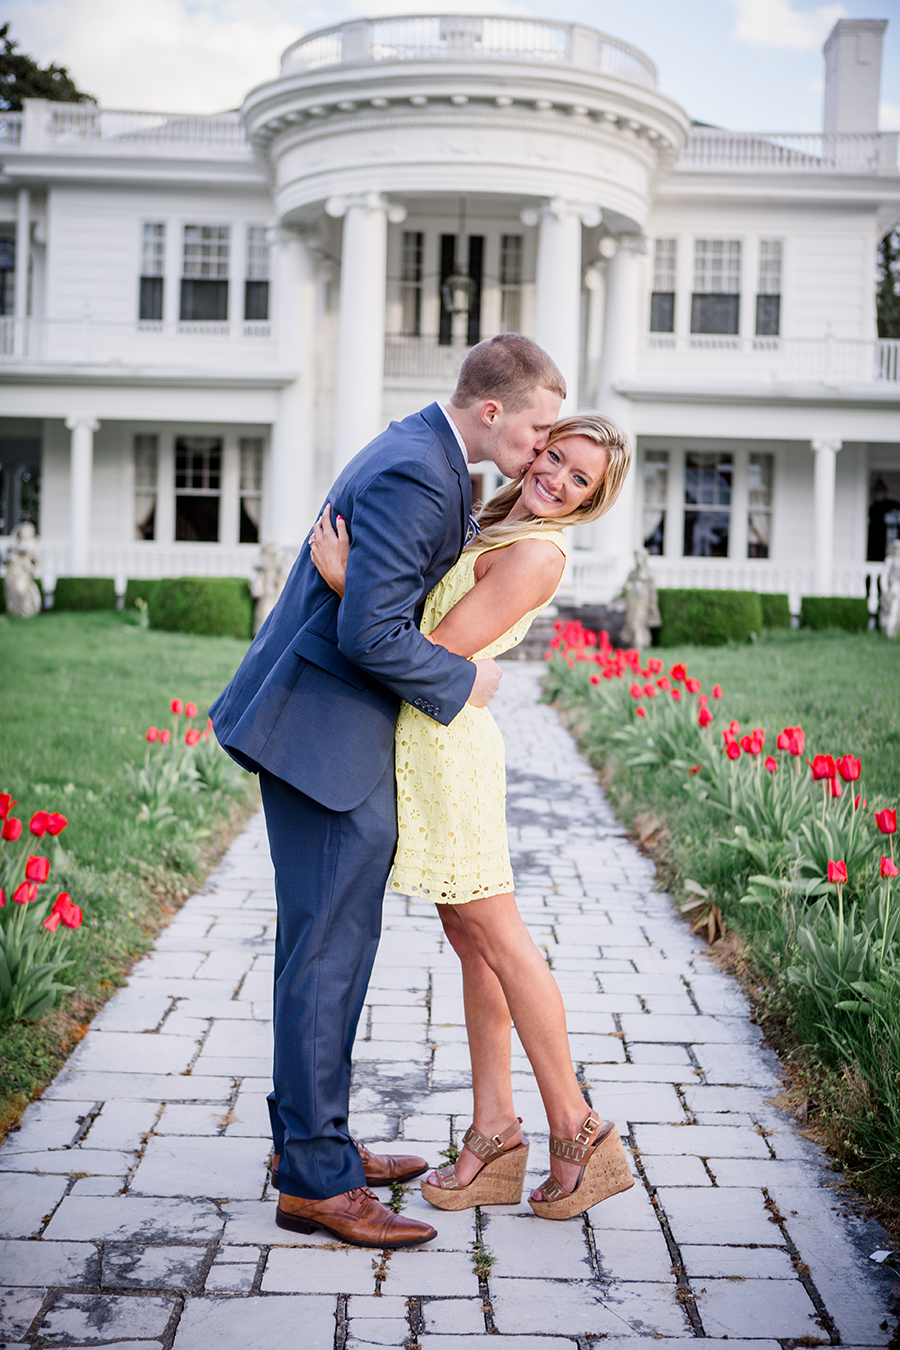 Kisses her cheek in middle of tulips engagement photo by Knoxville Wedding Photographer, Amanda May Photos.